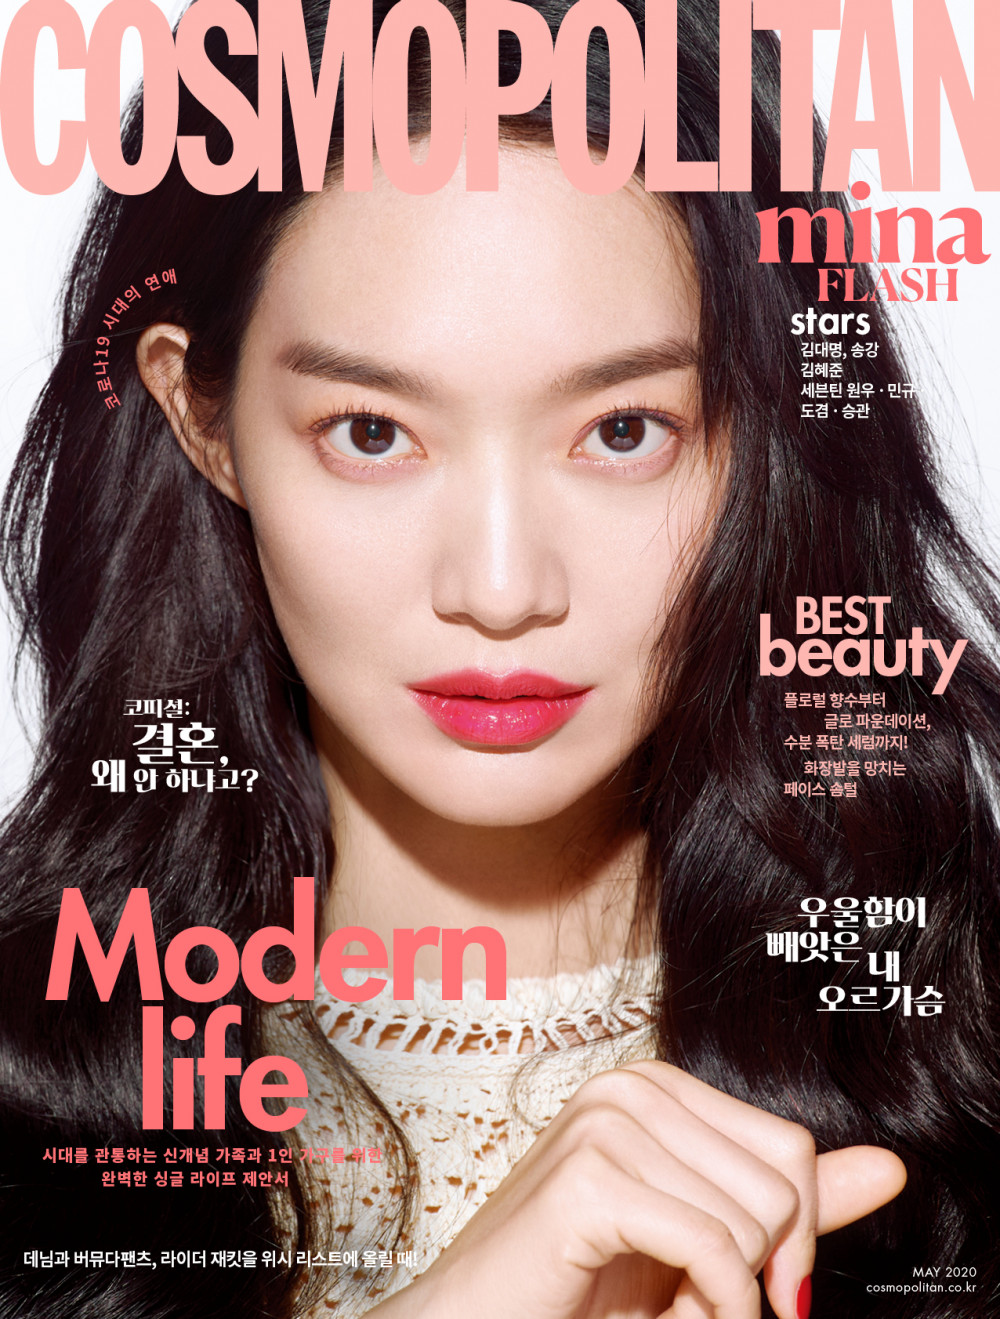 shin-min-ah-is-lovely-and-sweet-on-cosmopolitan-magazine-2